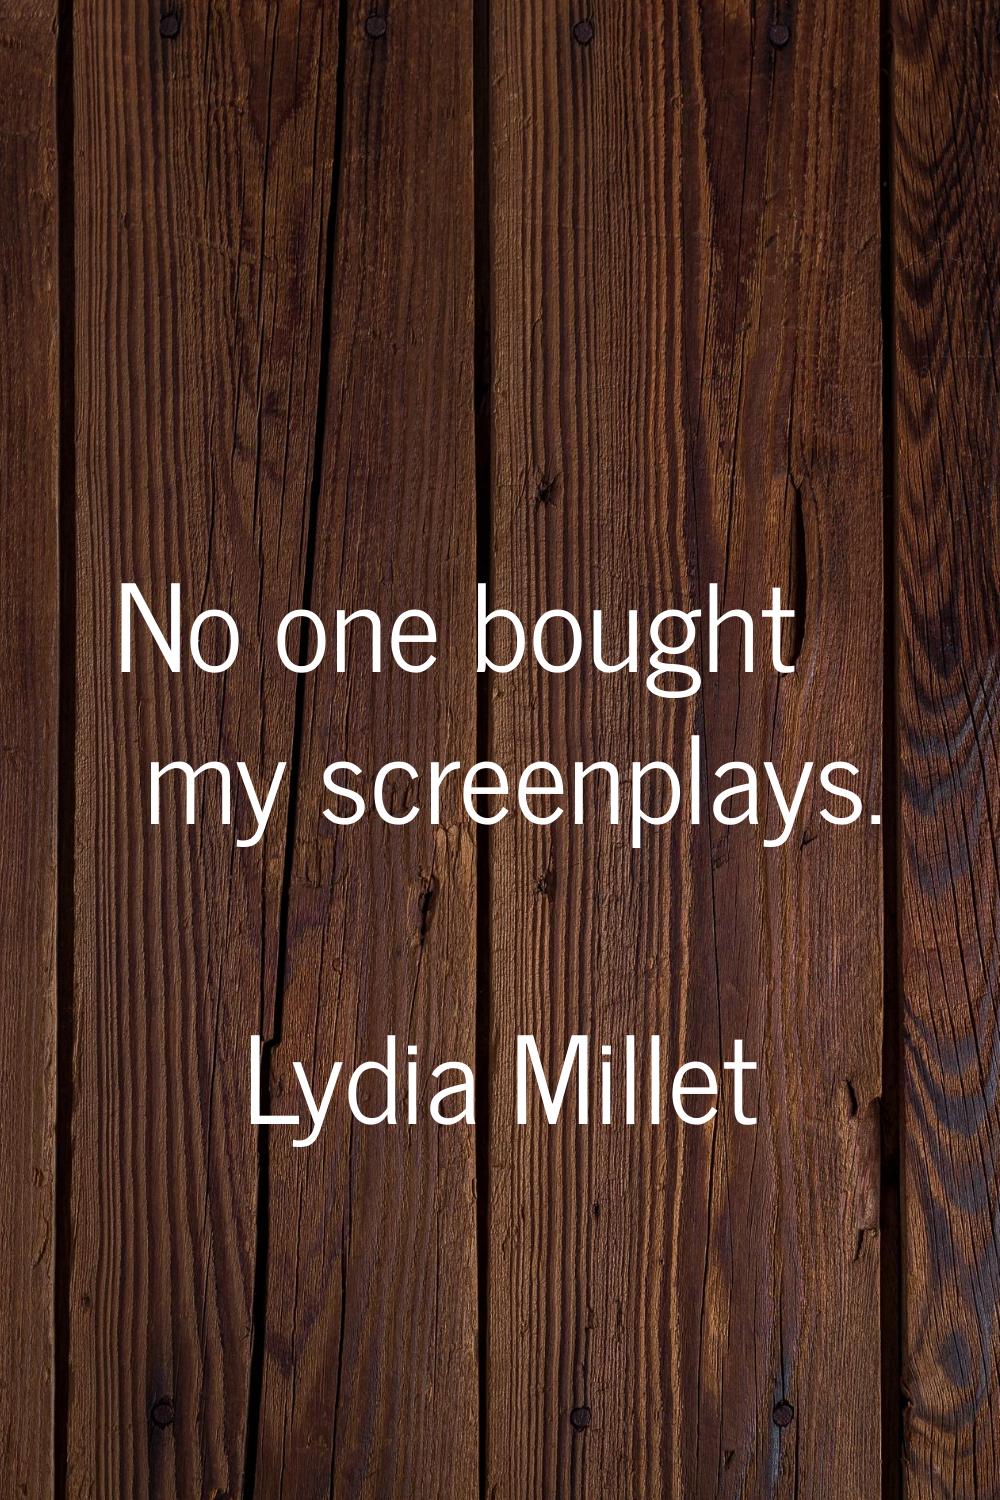 No one bought my screenplays.